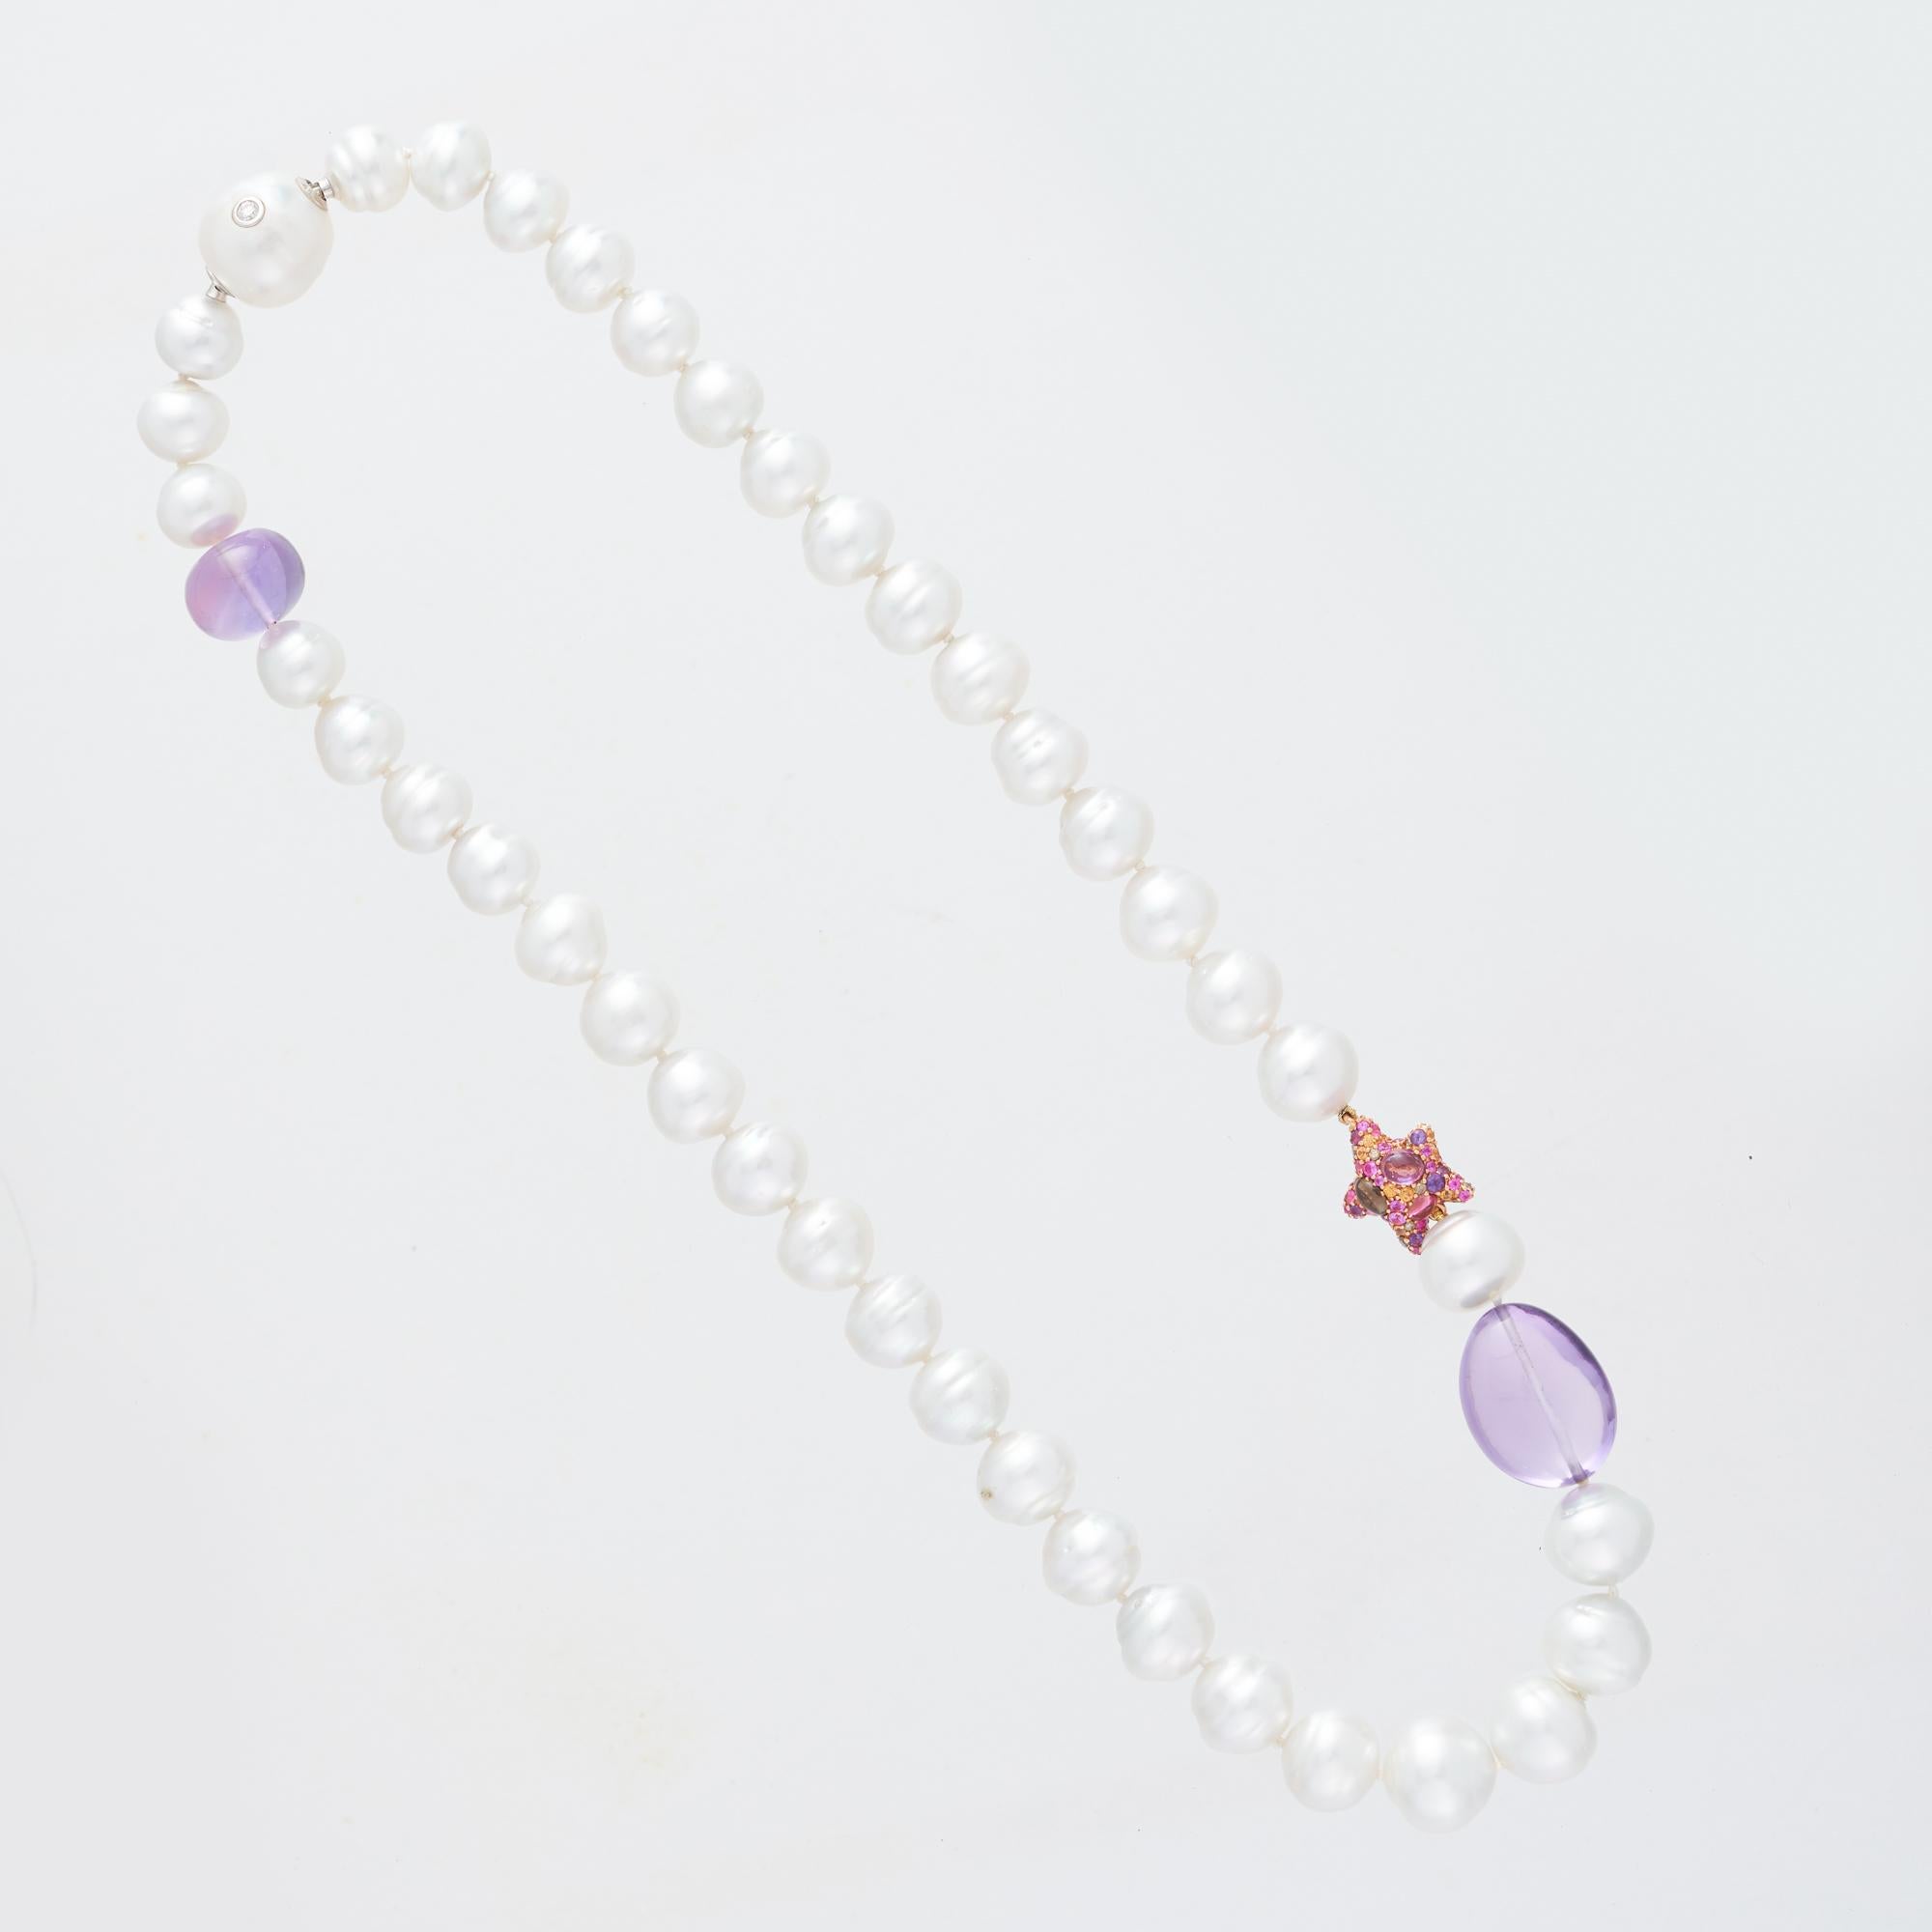 Margot McKinney South Sea Pearl, Star & Amethyst Pebble Necklet, 50cm long  featuring forty 10-14mm silver/white, circle South Sea Pearls, two Amethyst Pebbles, one Diamond and precious stone set 'purple star' enhancer and finished with an